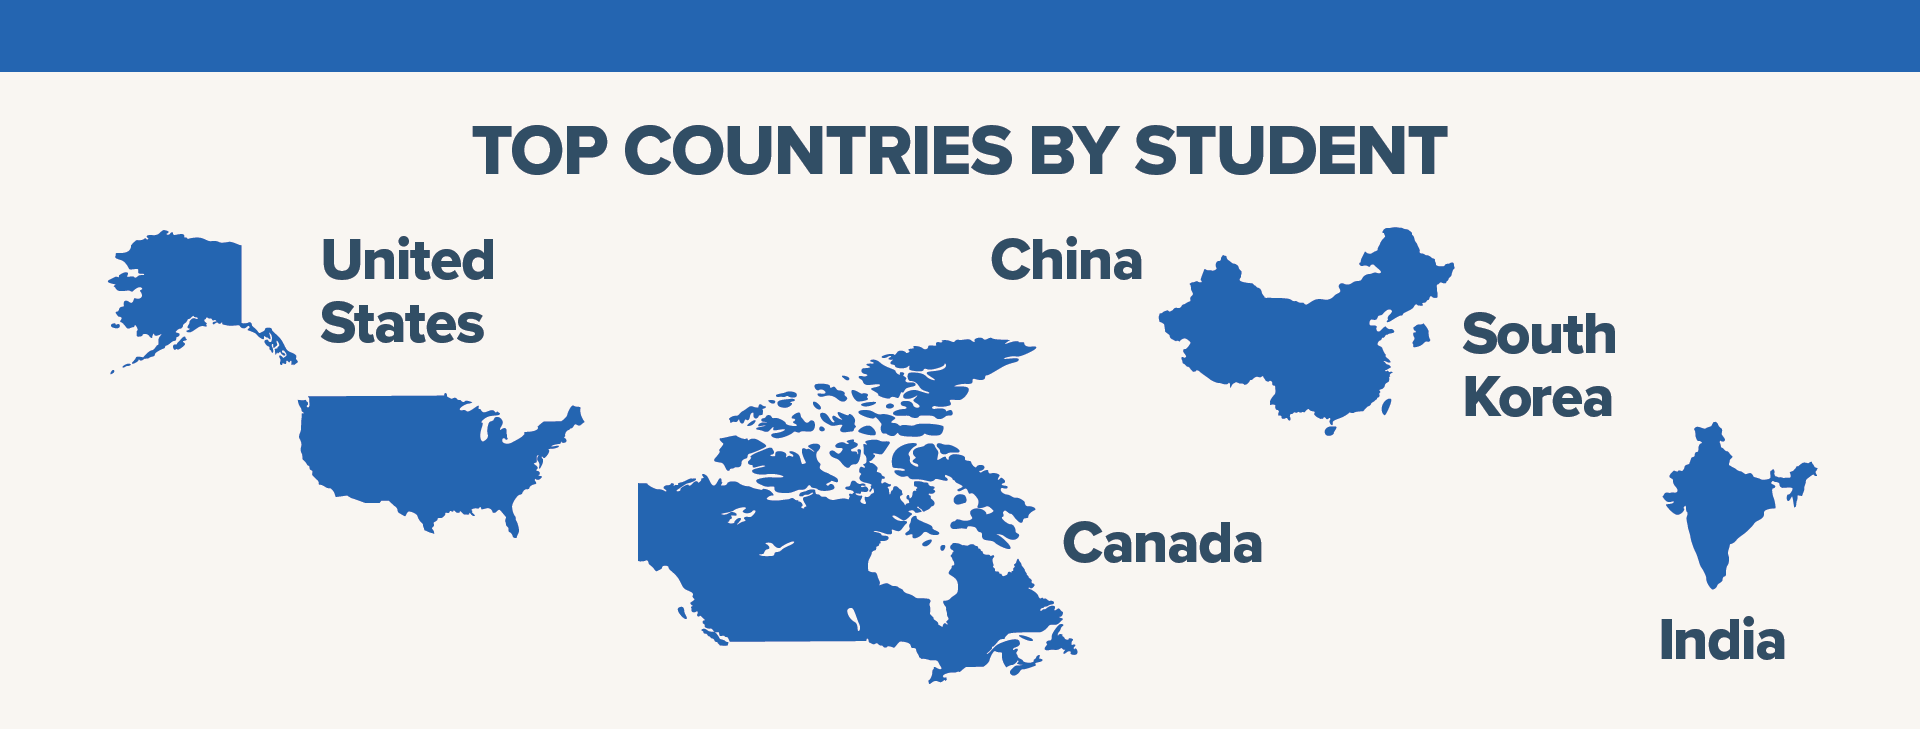 Top Countries (and/or total number of countries represented by students): United States, Canada, China, South Korea, India